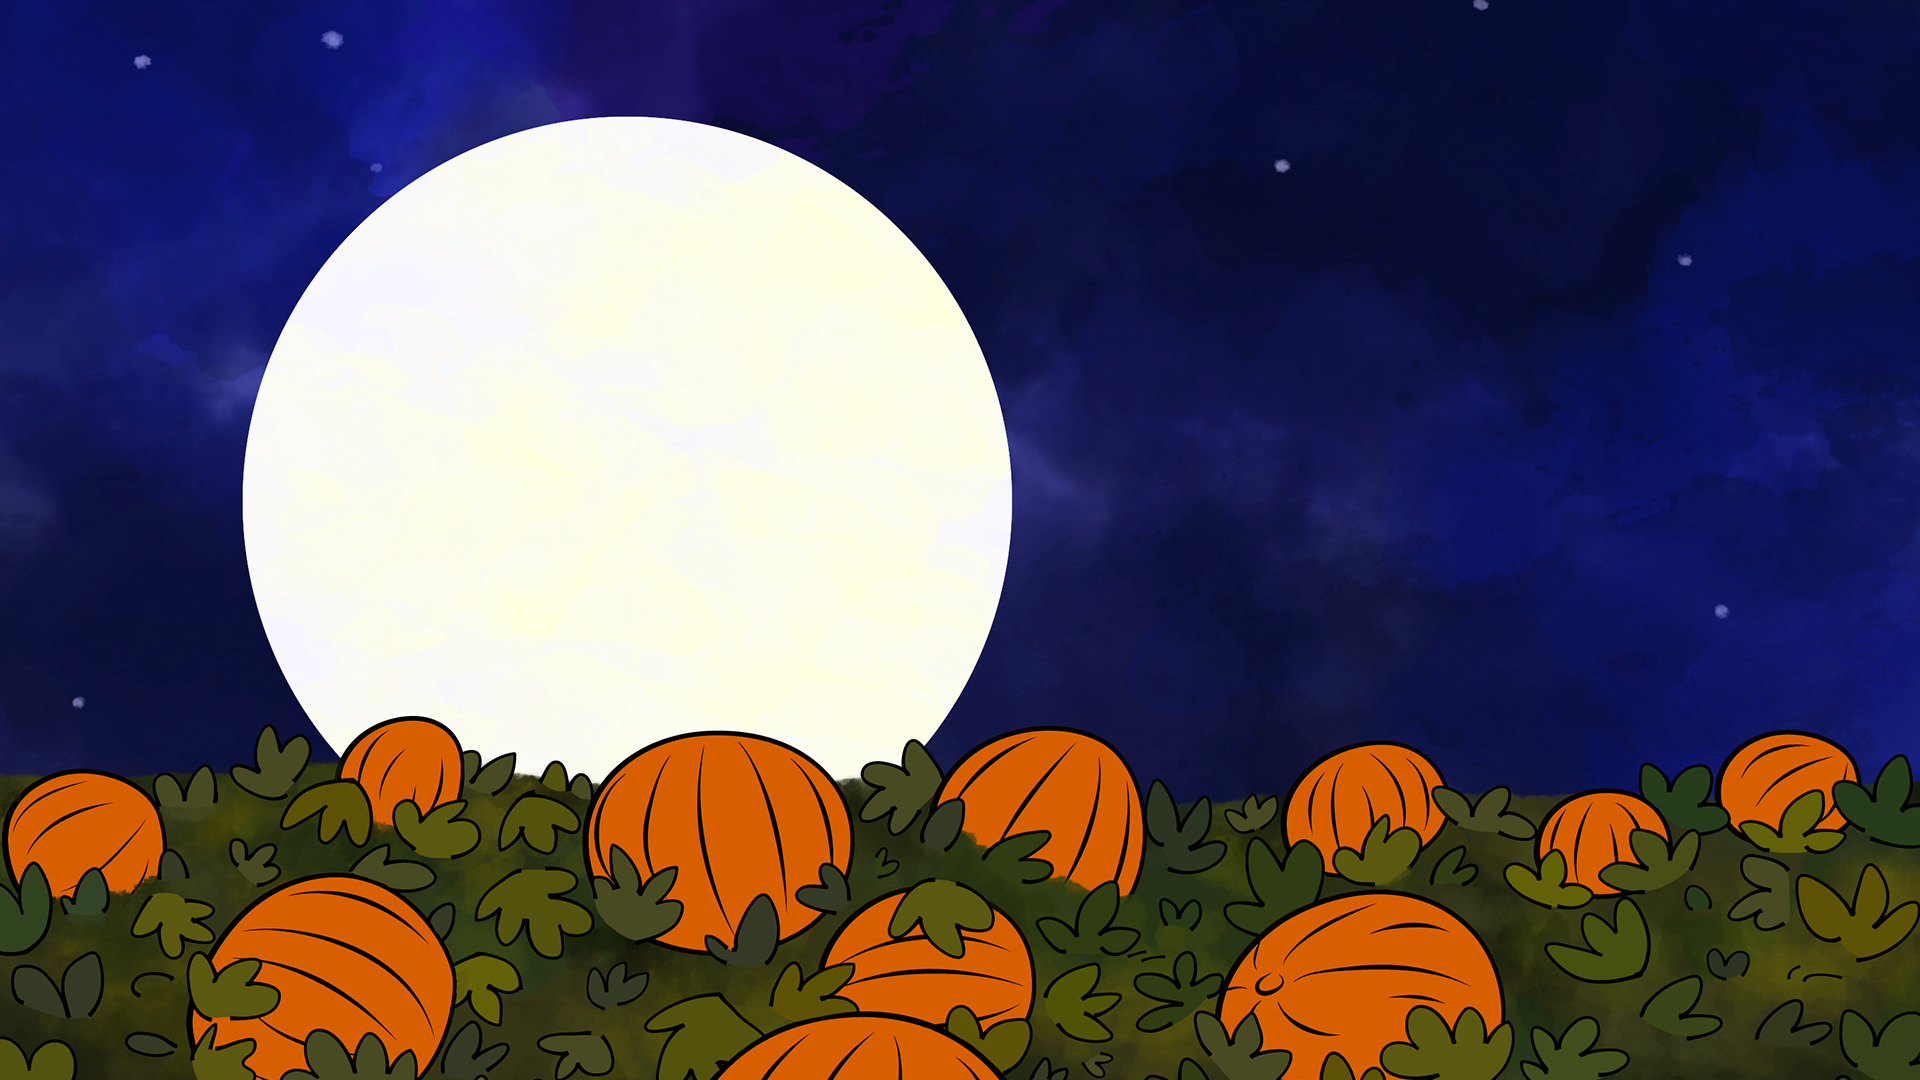 Movie It's the Great Pumpkin, Charlie Brown HD Wallpaper | Background Image